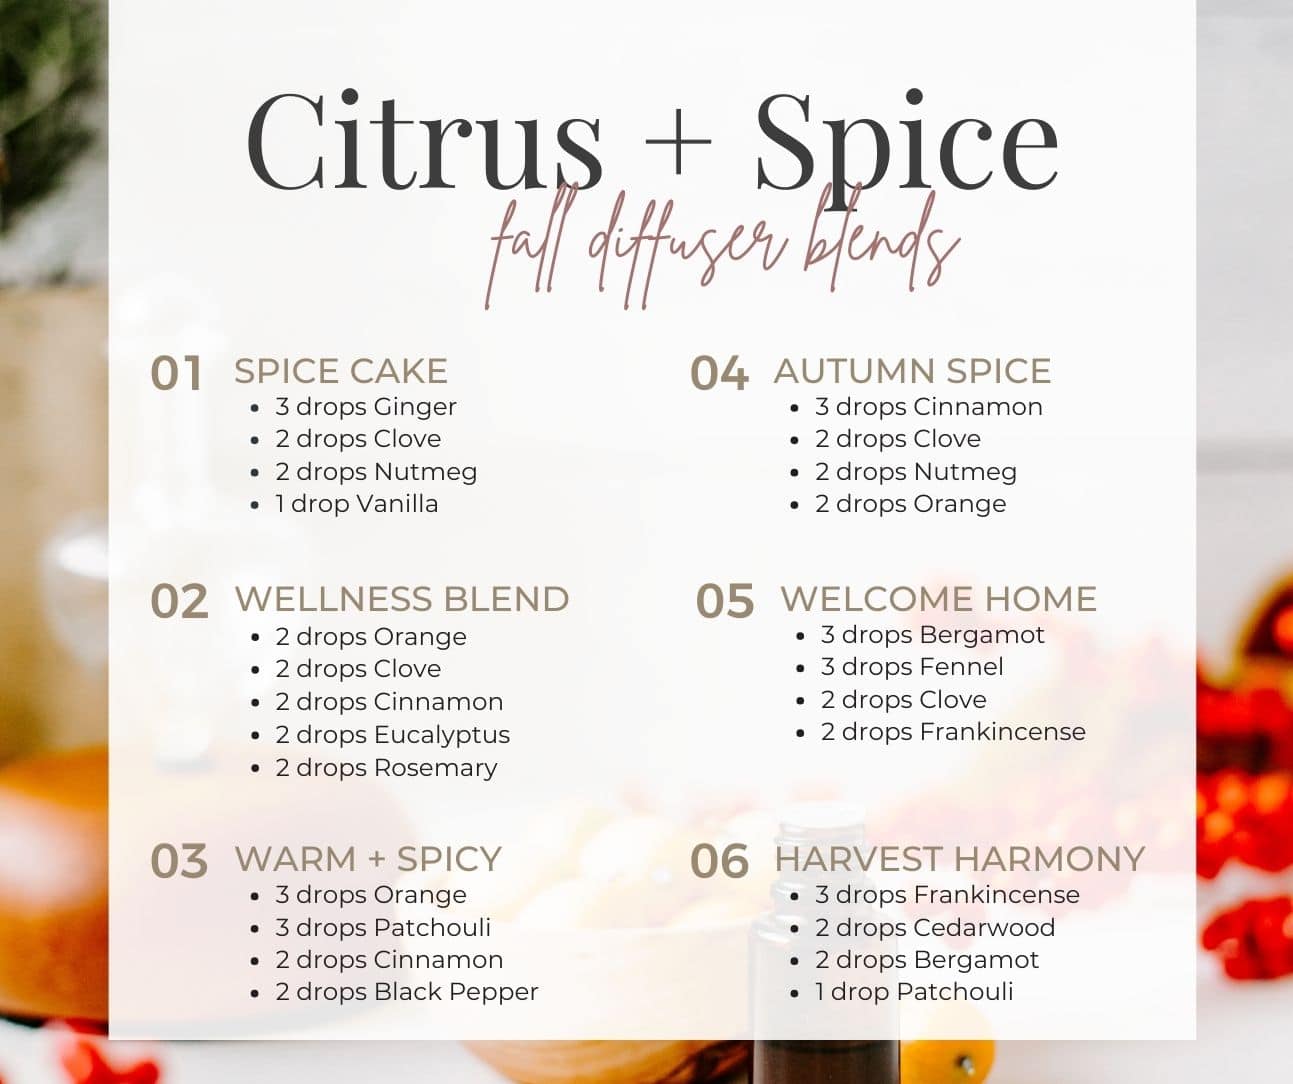 Floral Autumn Diffuser Blends and a DIY Reed Diffuser for Fall